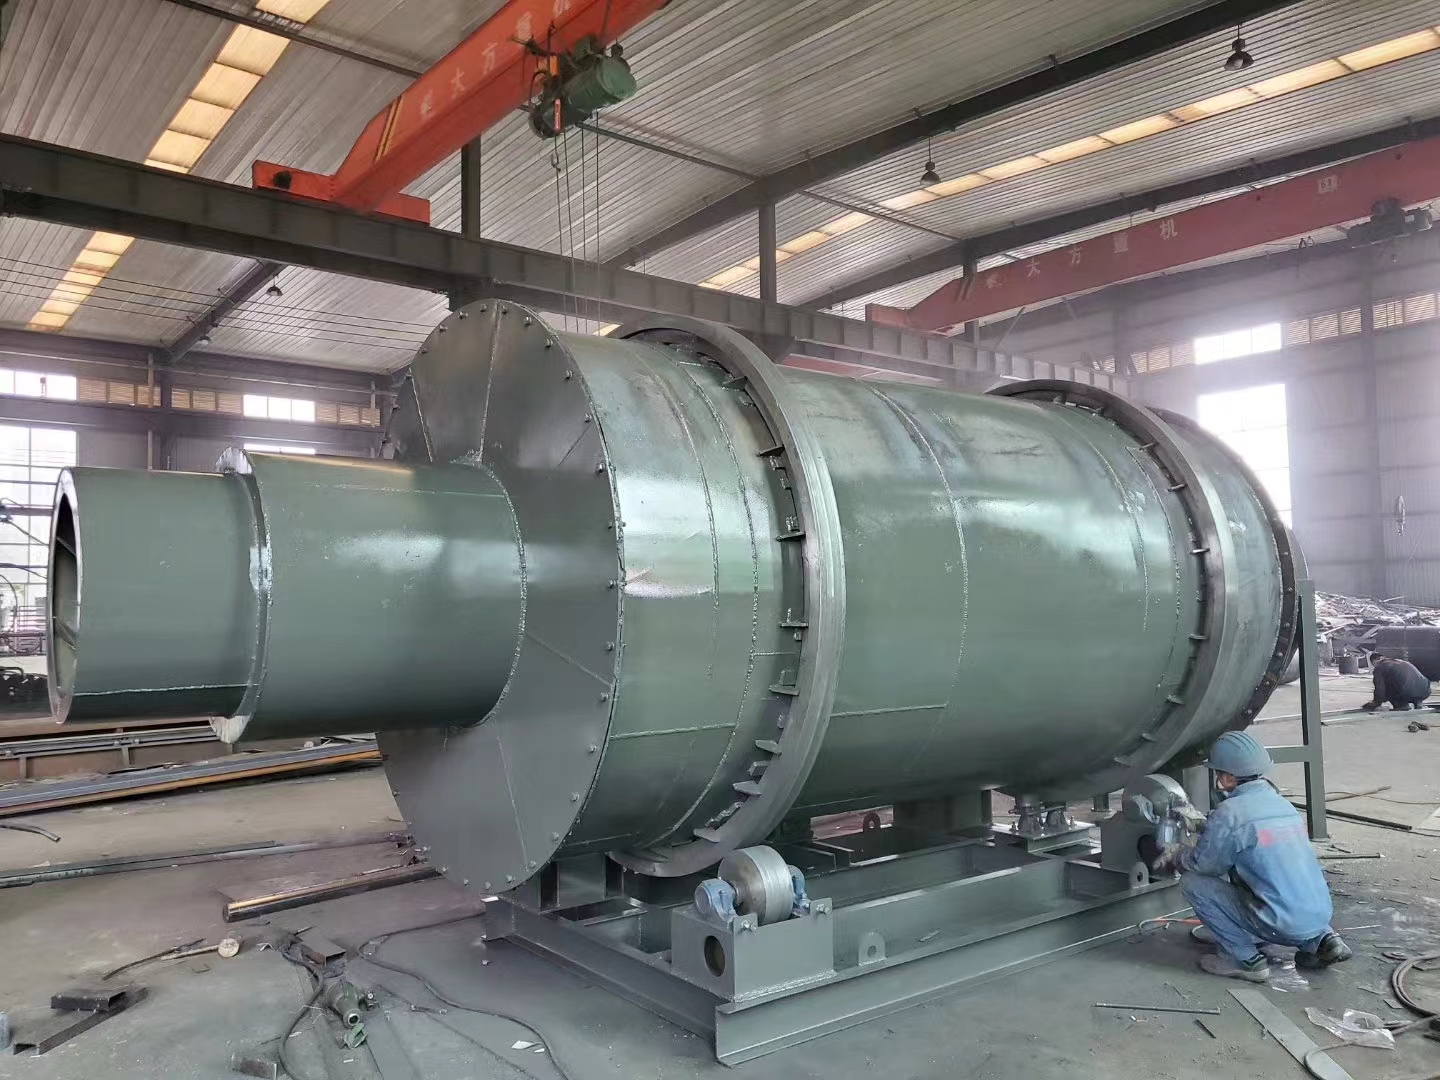 2.1M diameter, three-pass drum dryer for river sand and quartz sand, completed and delivered.